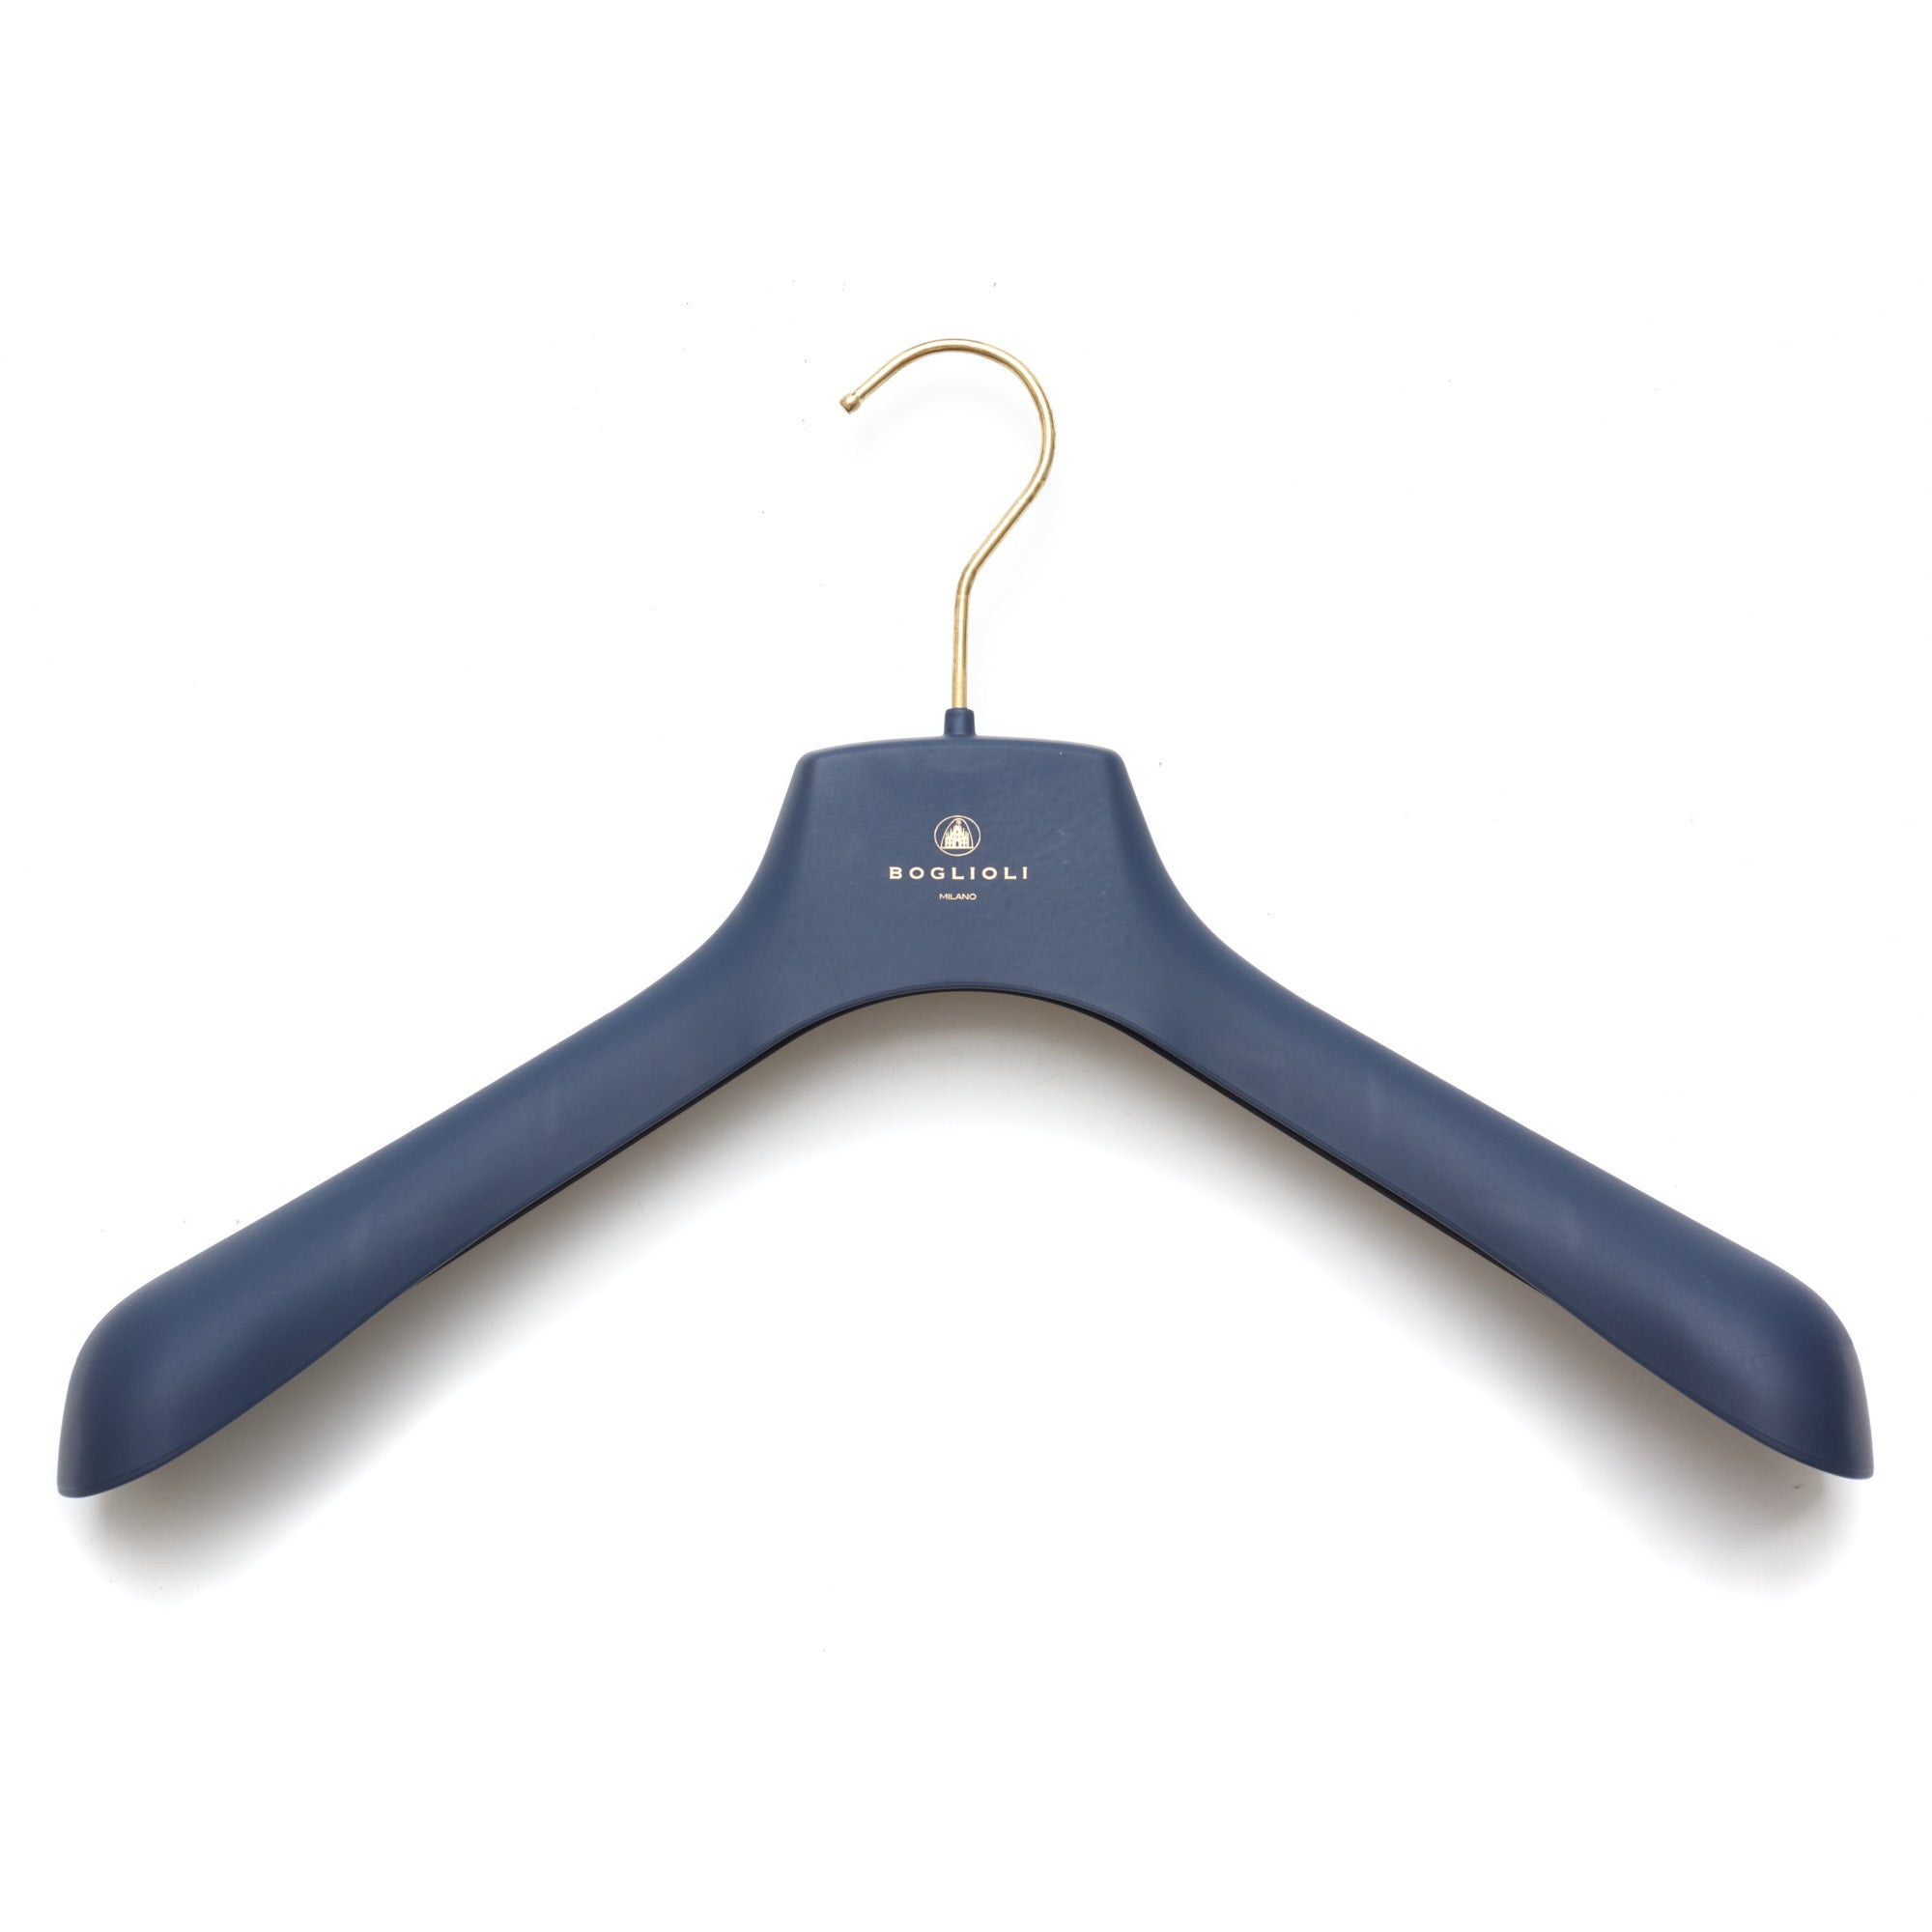 Clothes hangers for fashion brands